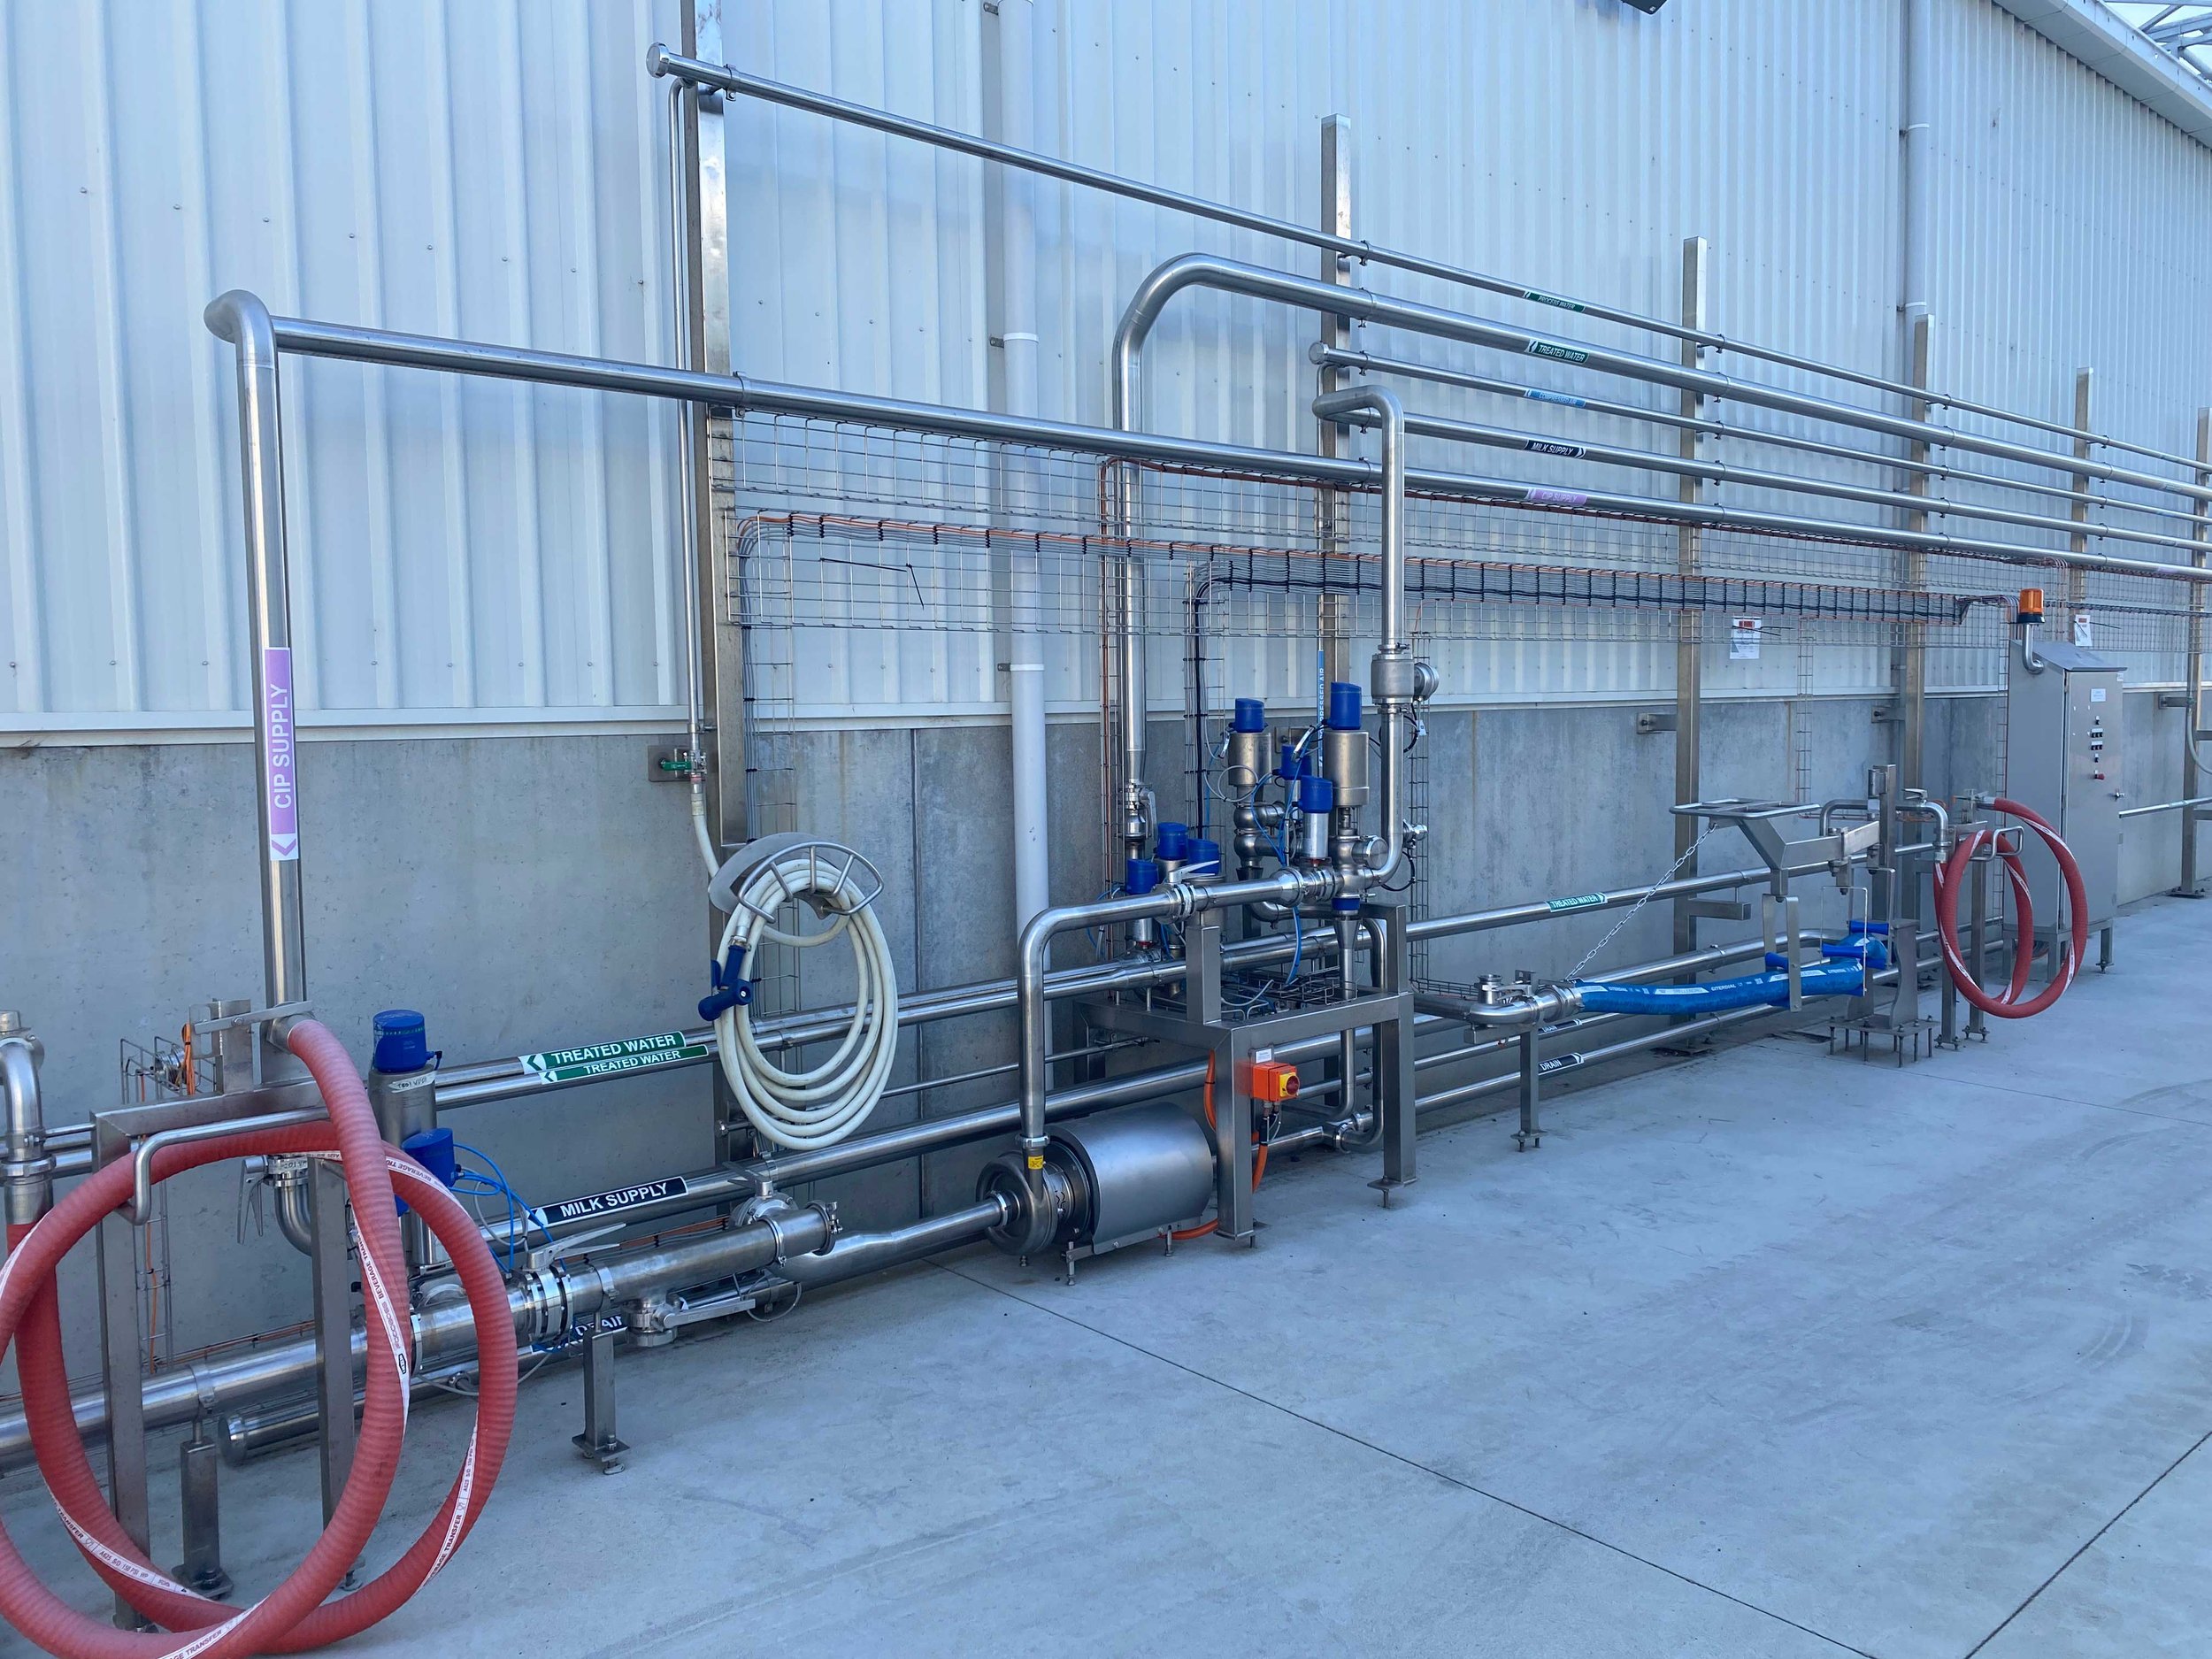 Stainless_designs_wet_process_plant_exterior.jpg